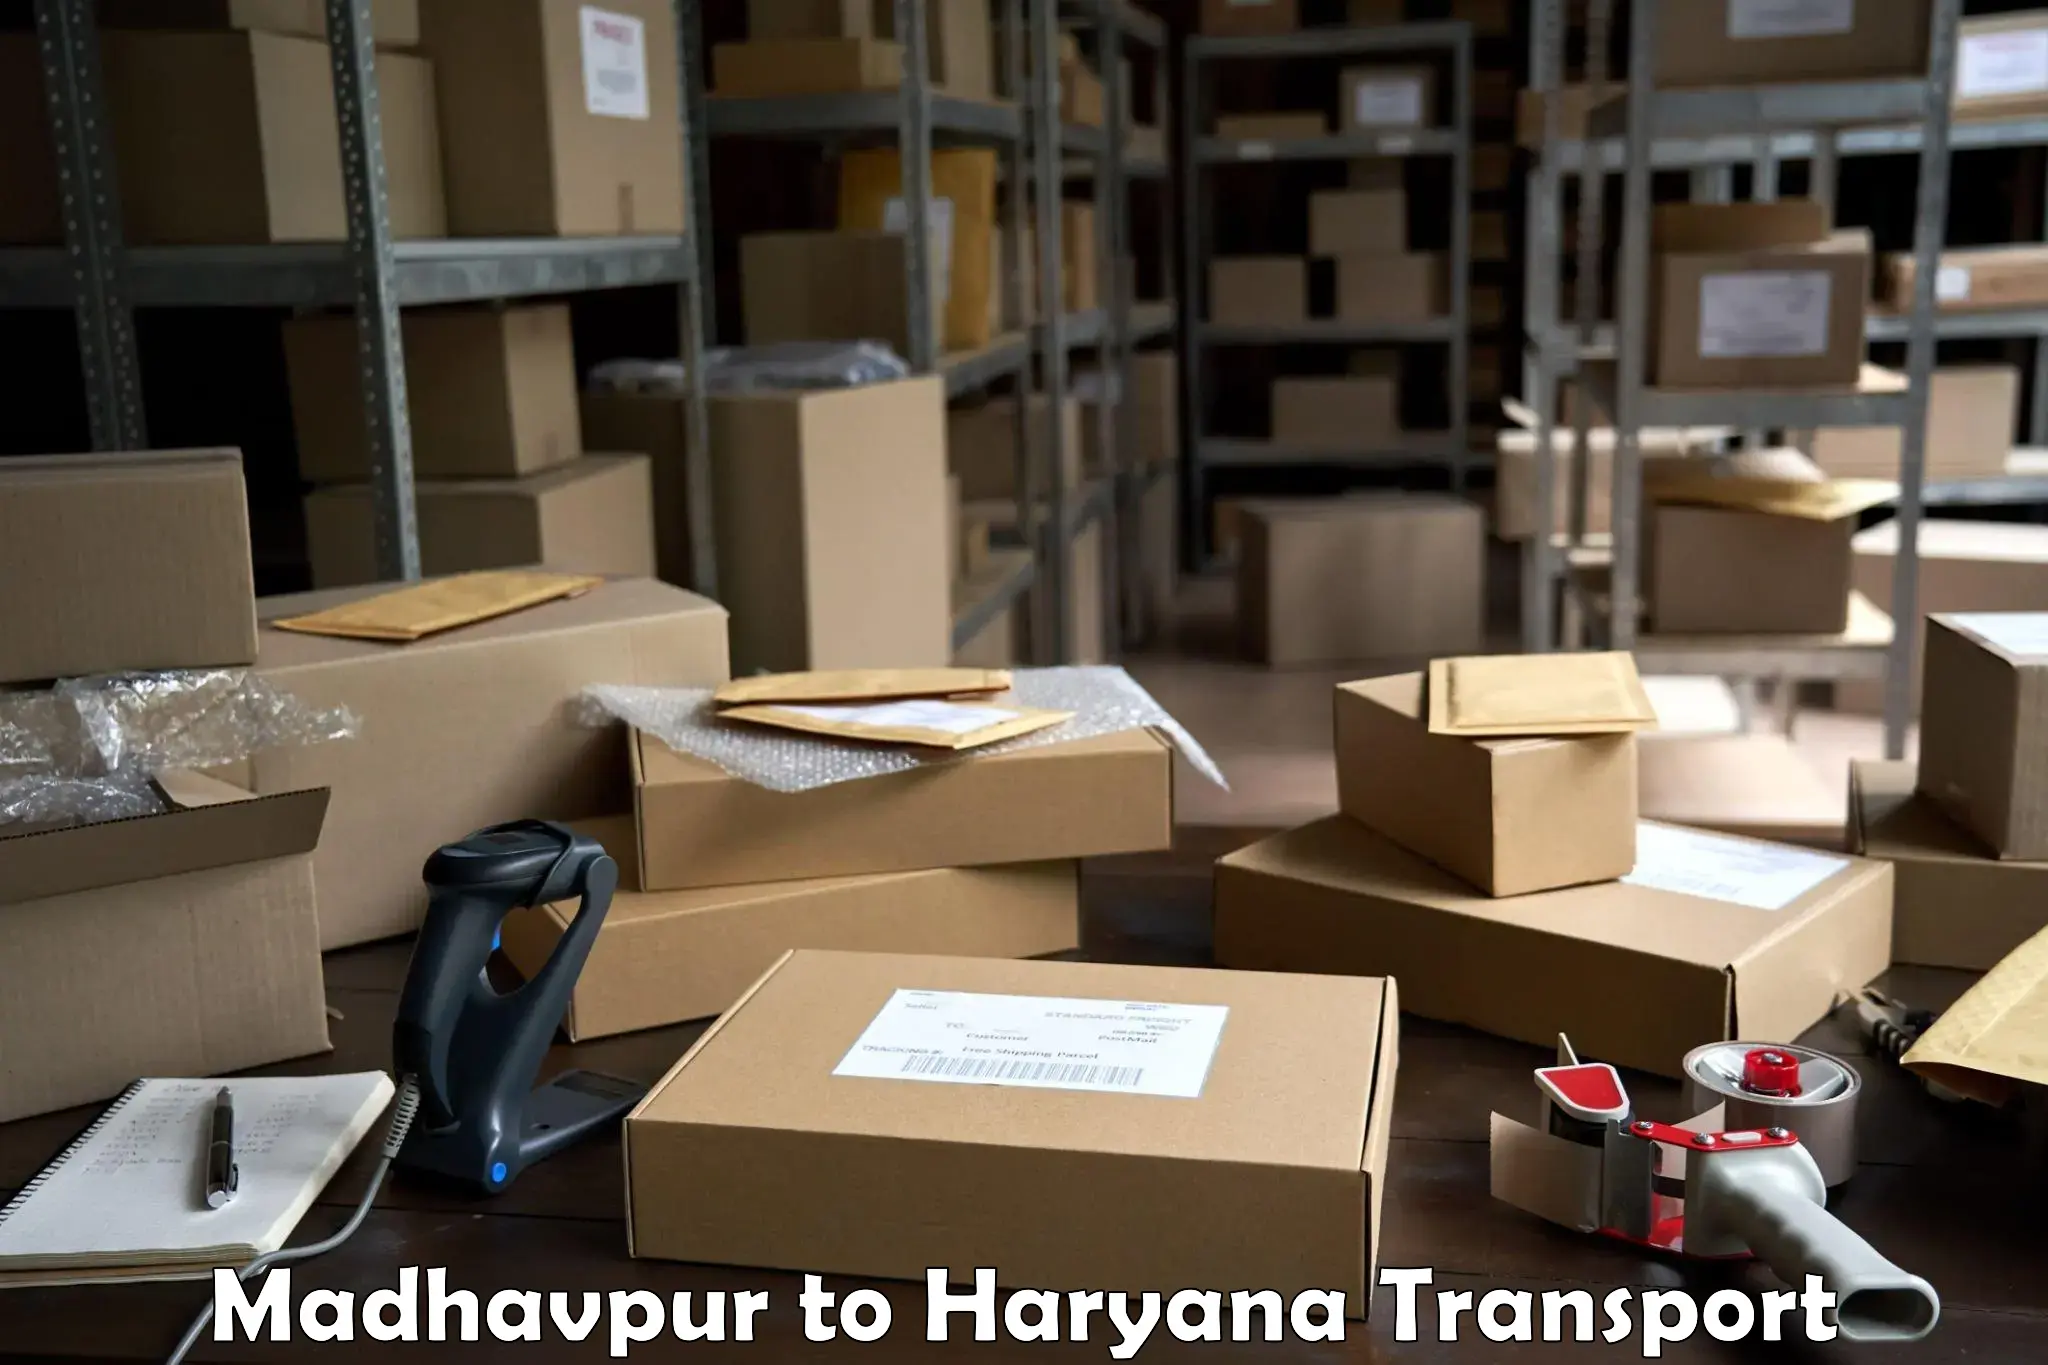 Goods delivery service Madhavpur to Chaudhary Charan Singh Haryana Agricultural University Hisar